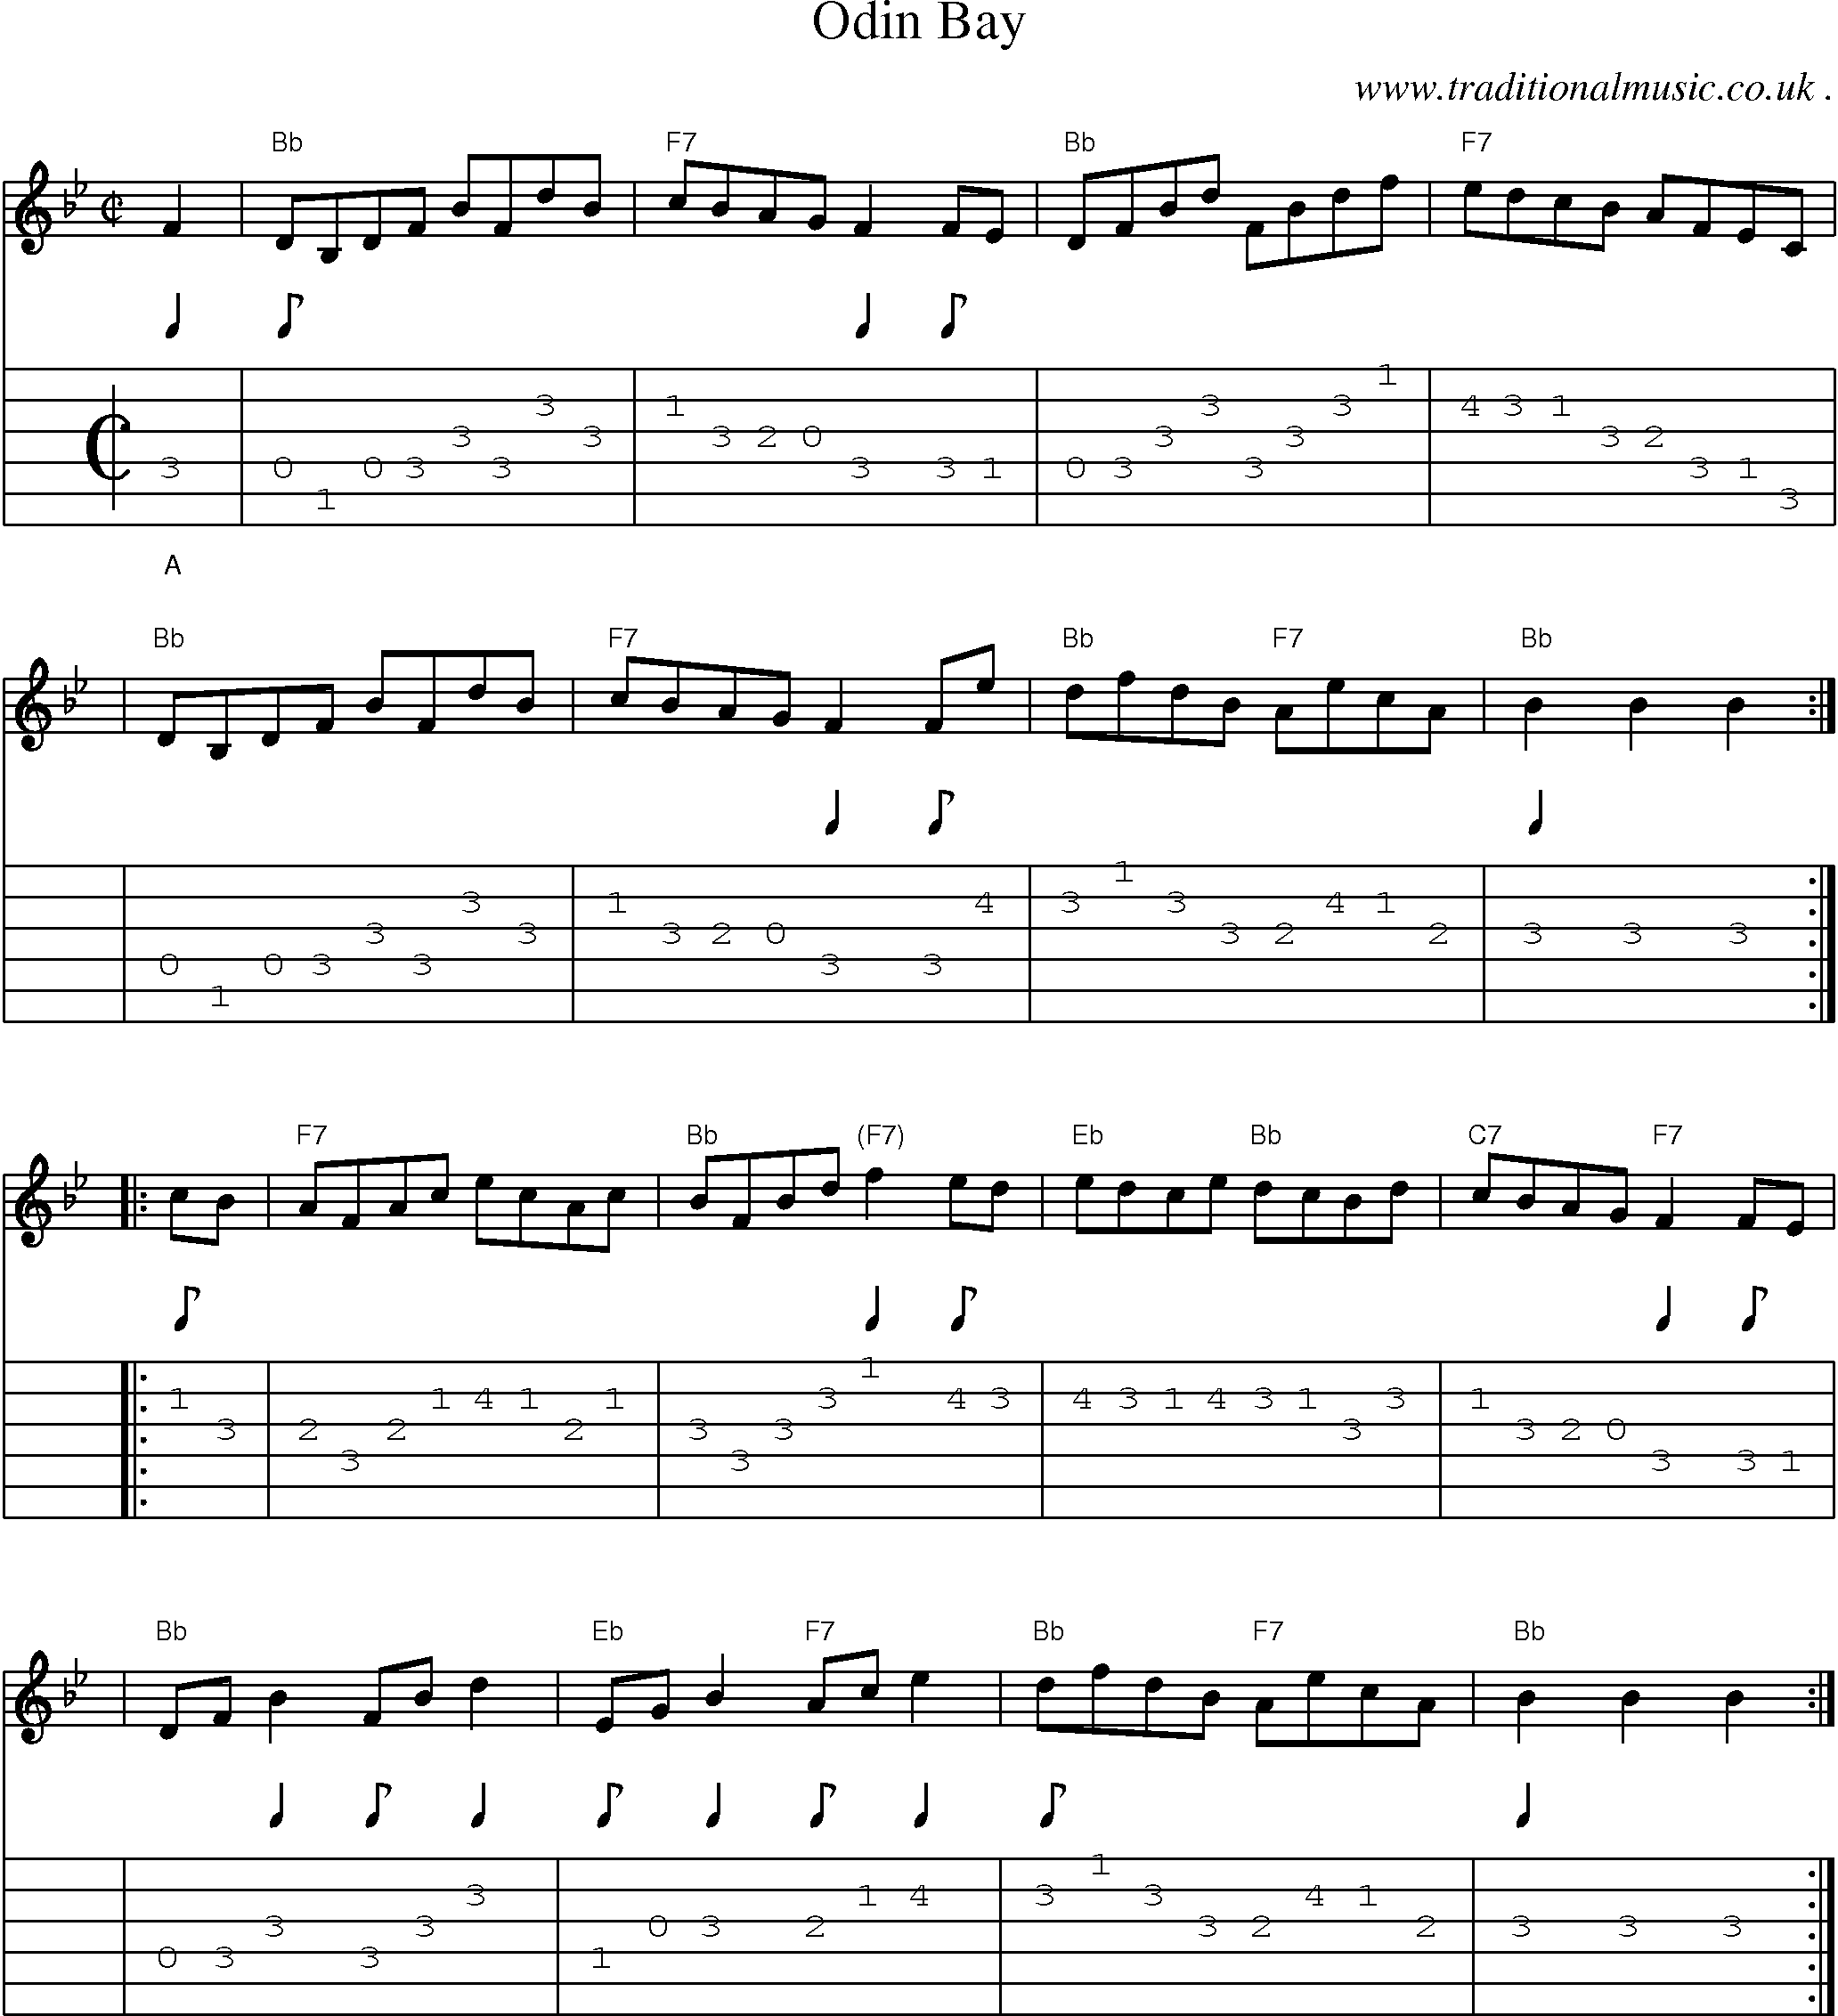 Sheet-music  score, Chords and Guitar Tabs for Odin Bay